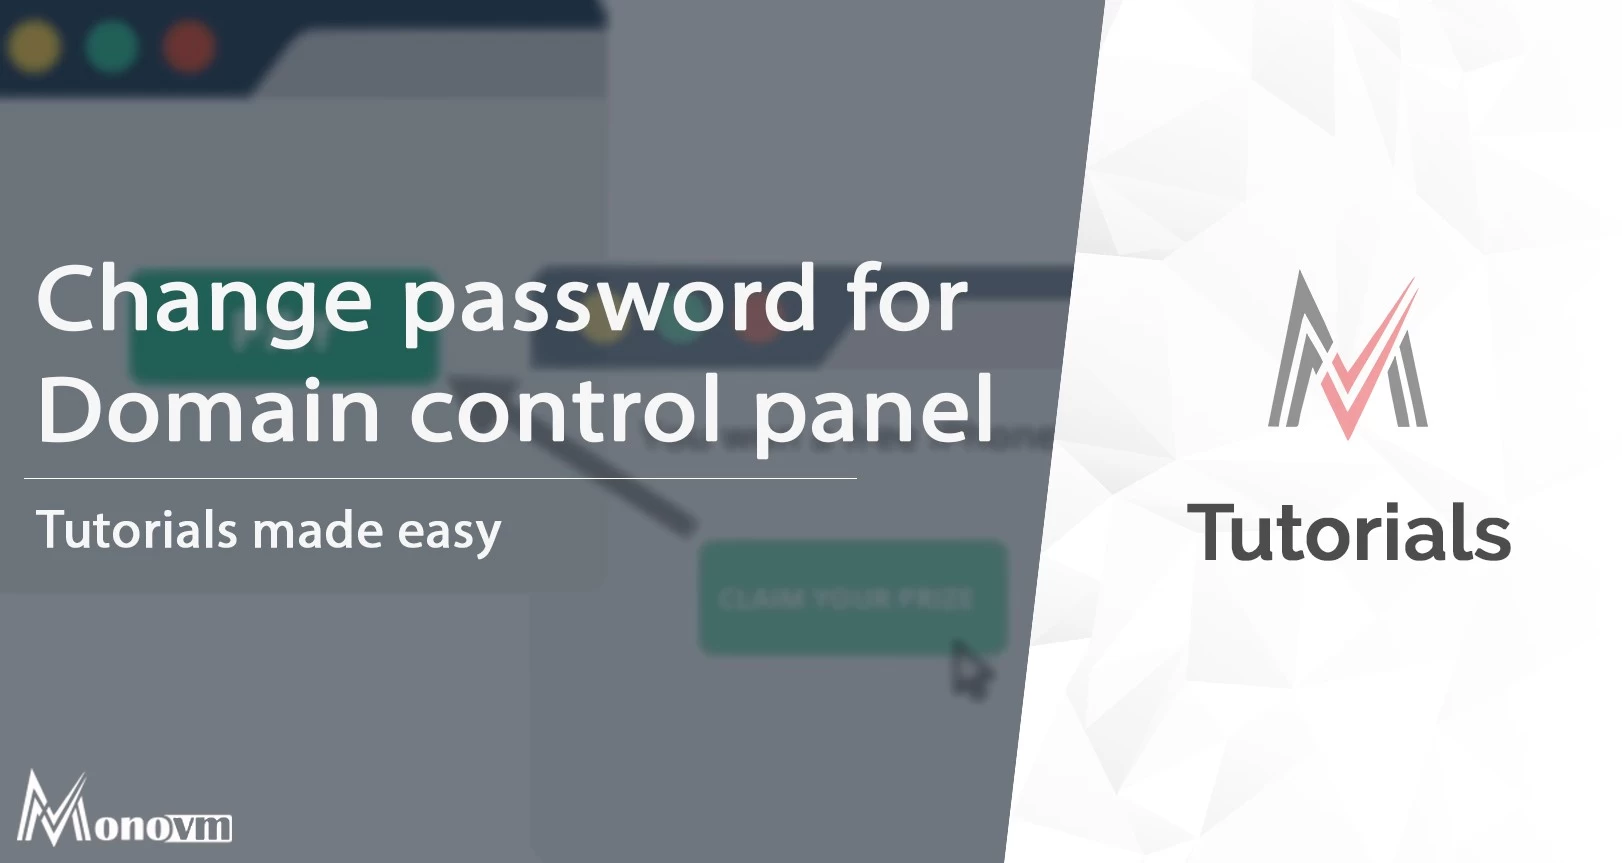 How to change password in Domain Control panel